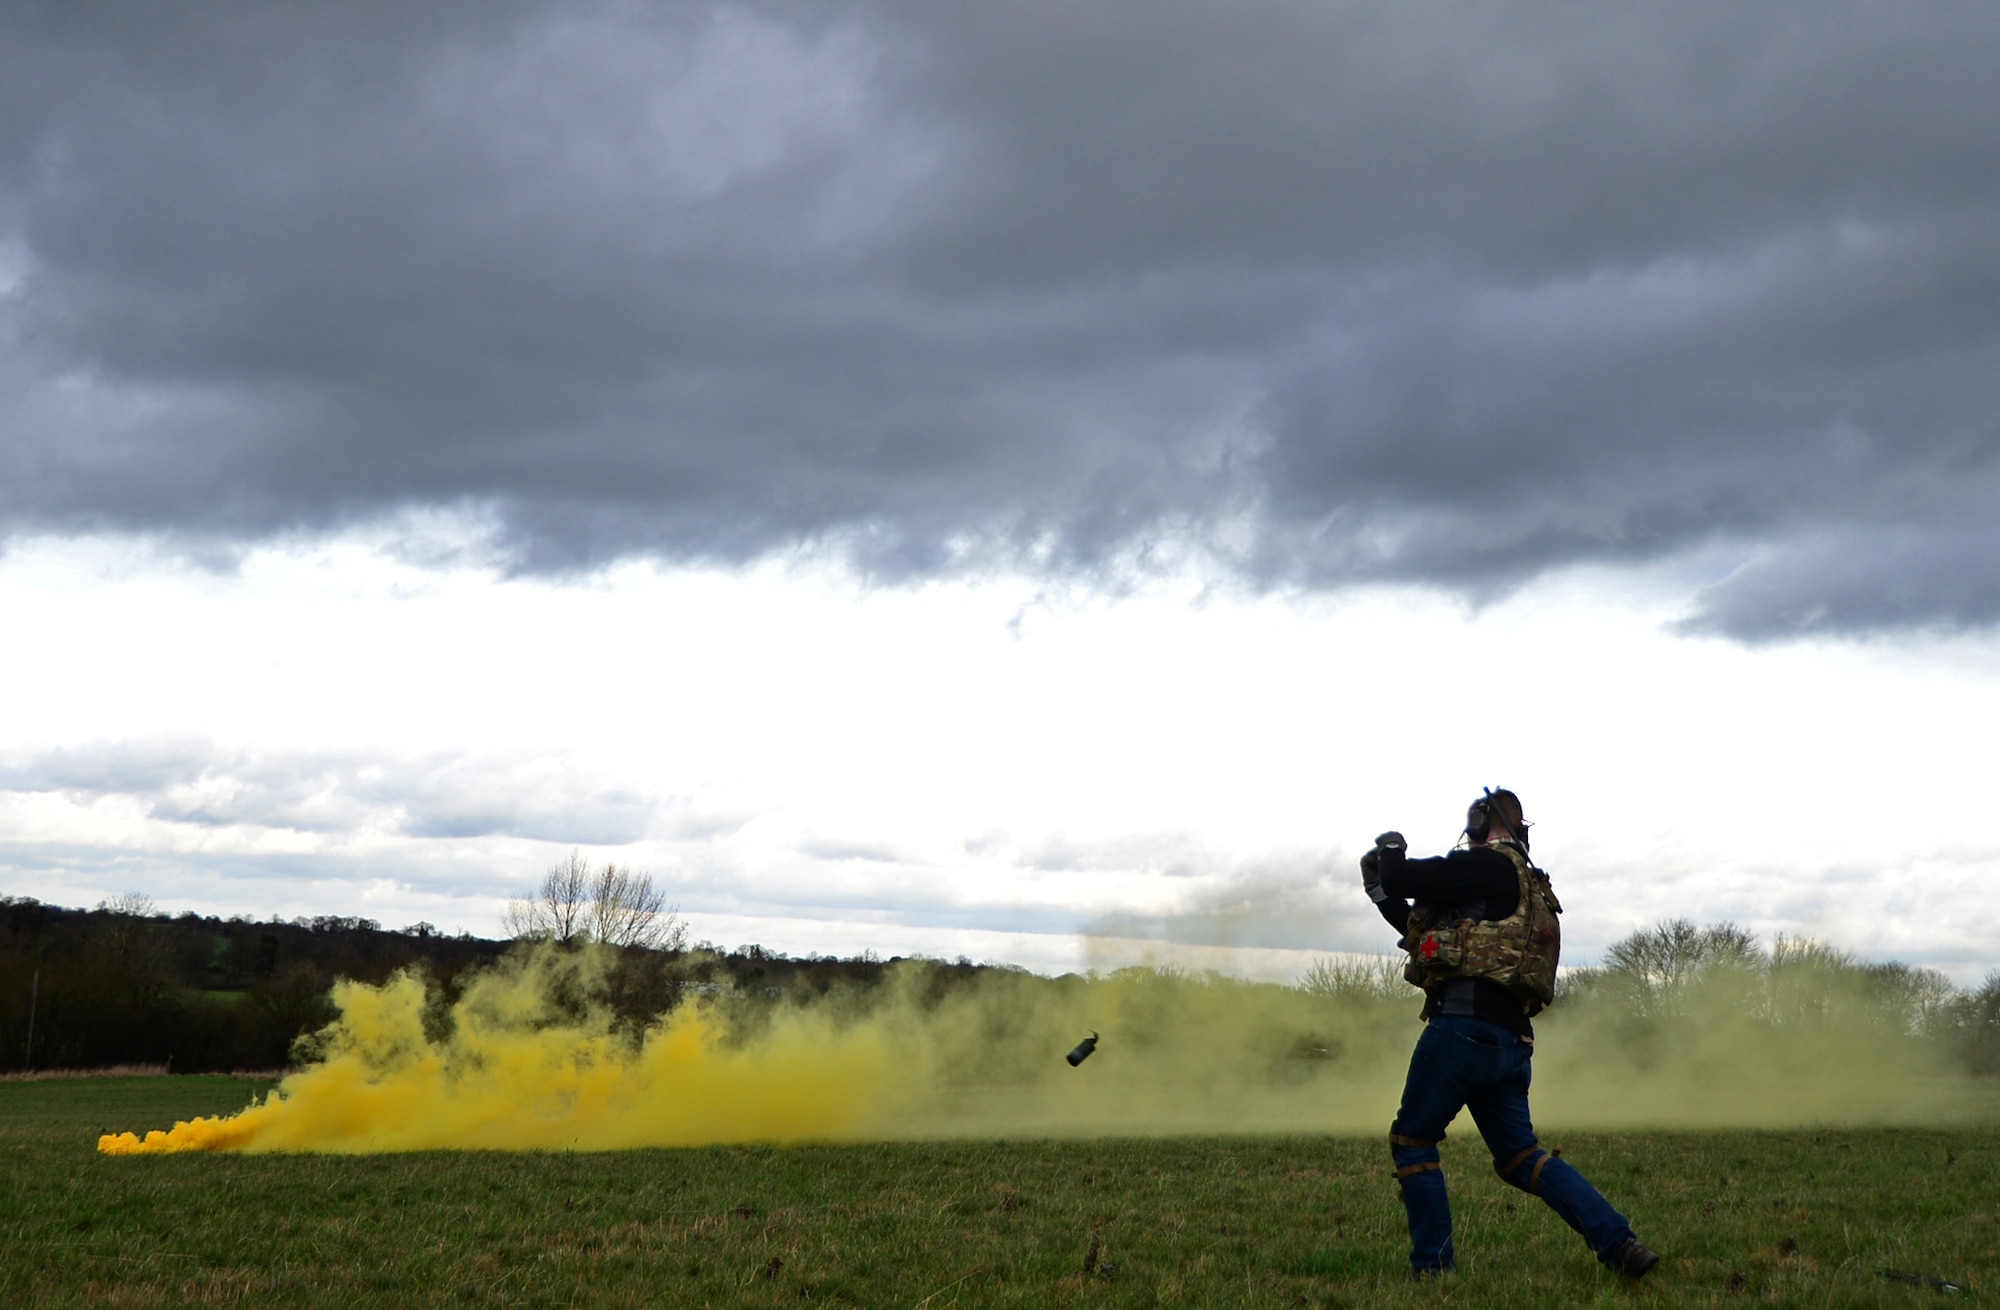 Staff Sgt. Joseph Bland, 56th Rescue Squadron special missions aviator, throws a smoke grenade during a combat search and rescue task force training exercise near Hinderclay, England, Feb. 4, 2016. Airmen assigned to the 56th and 57th RQSs performed various CSAR maneuvers to respond to a simulated threat scenario. (U.S. Air Force photo/Senior Airman Erin Trower)